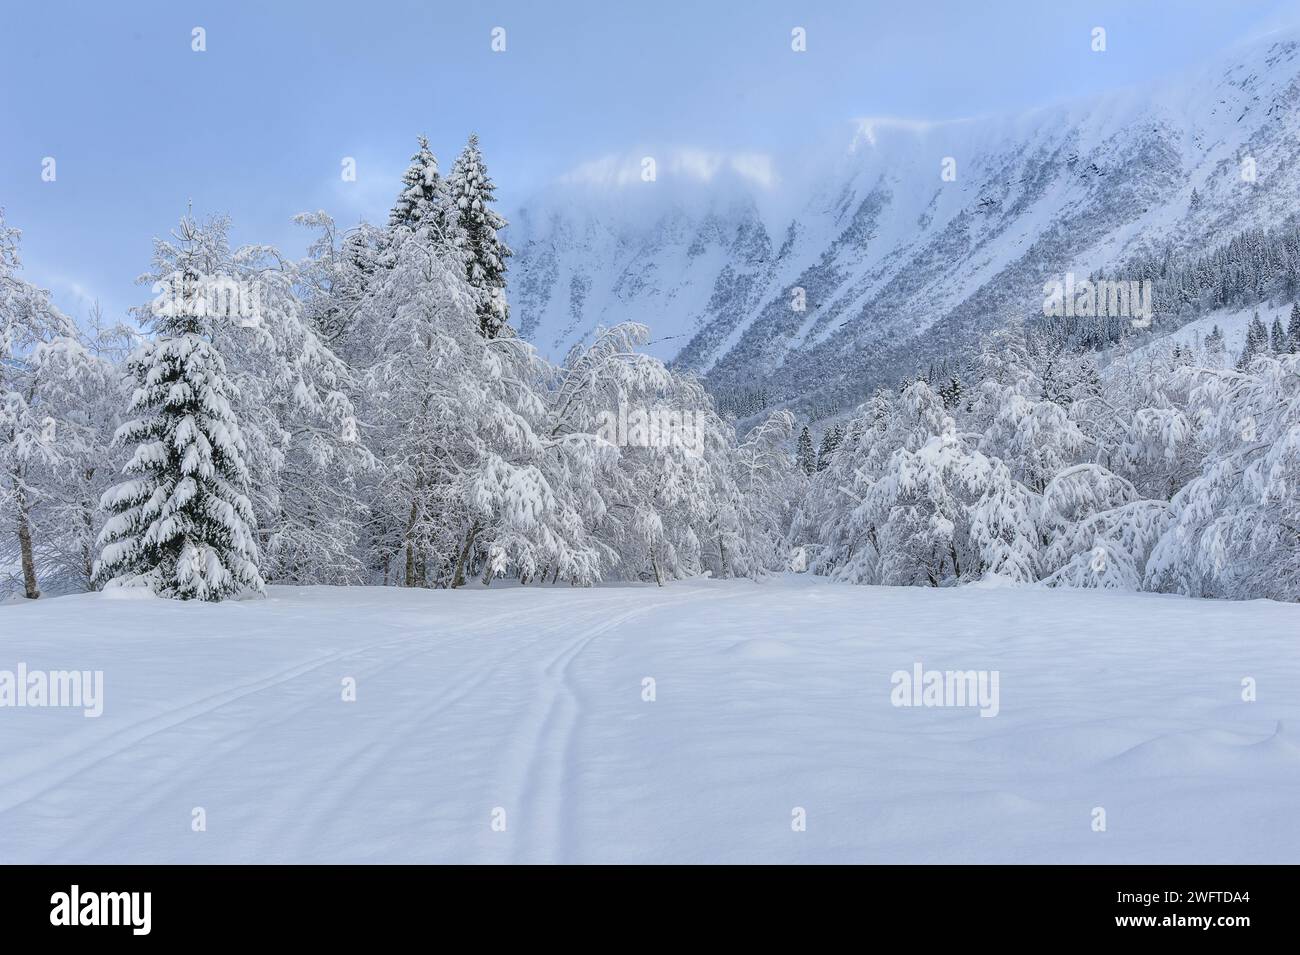 A serene landscape shows a fresh blanket of snow enveloping the trees and mountains, creating a silent and picturesque winter scene. Stock Photo